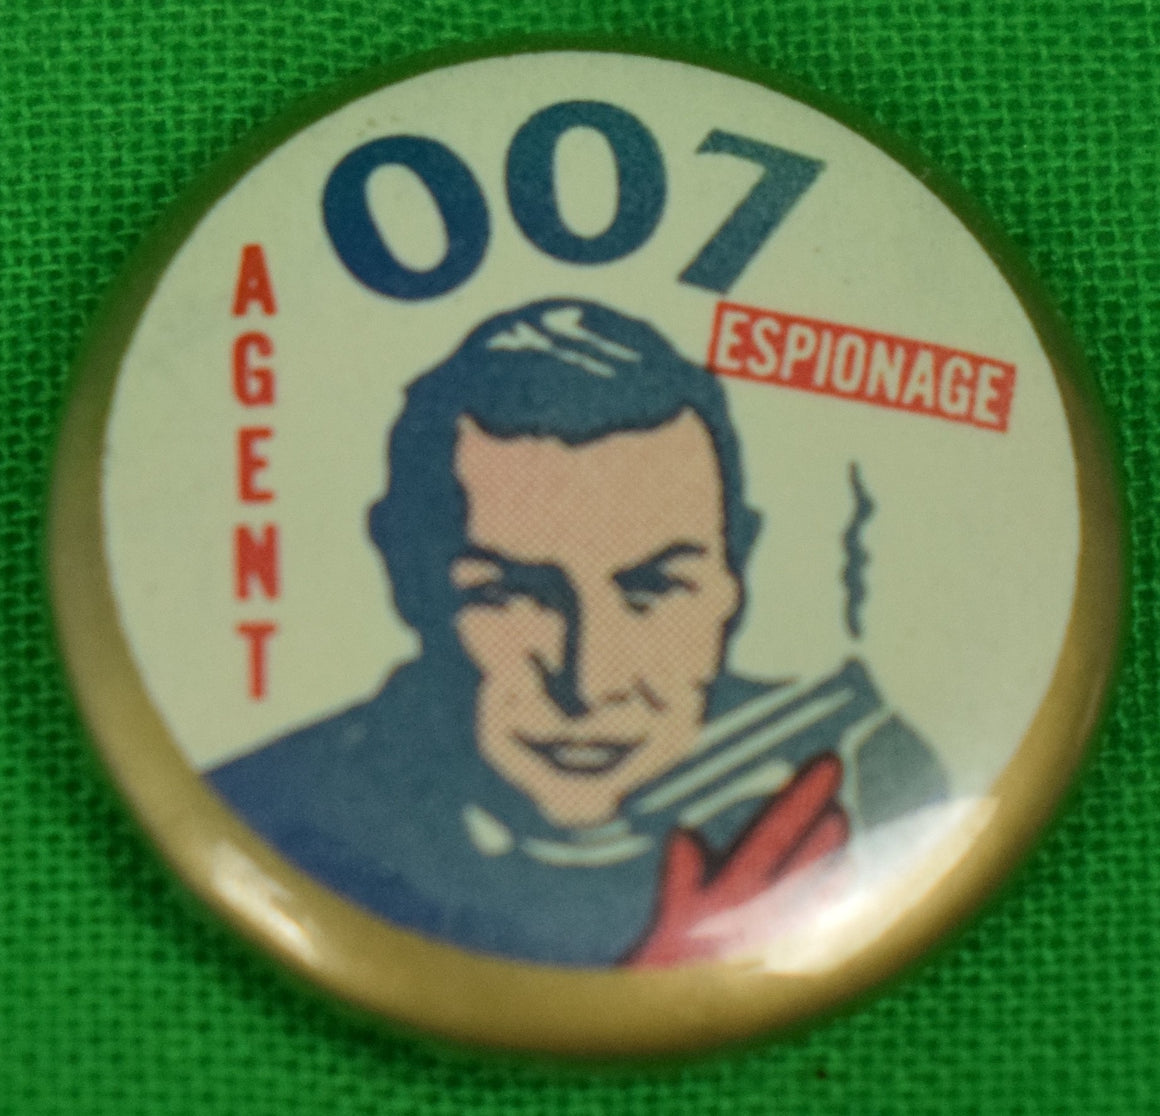 Sean Connery Agent 007 James Bond Espionage Pin (SOLD)